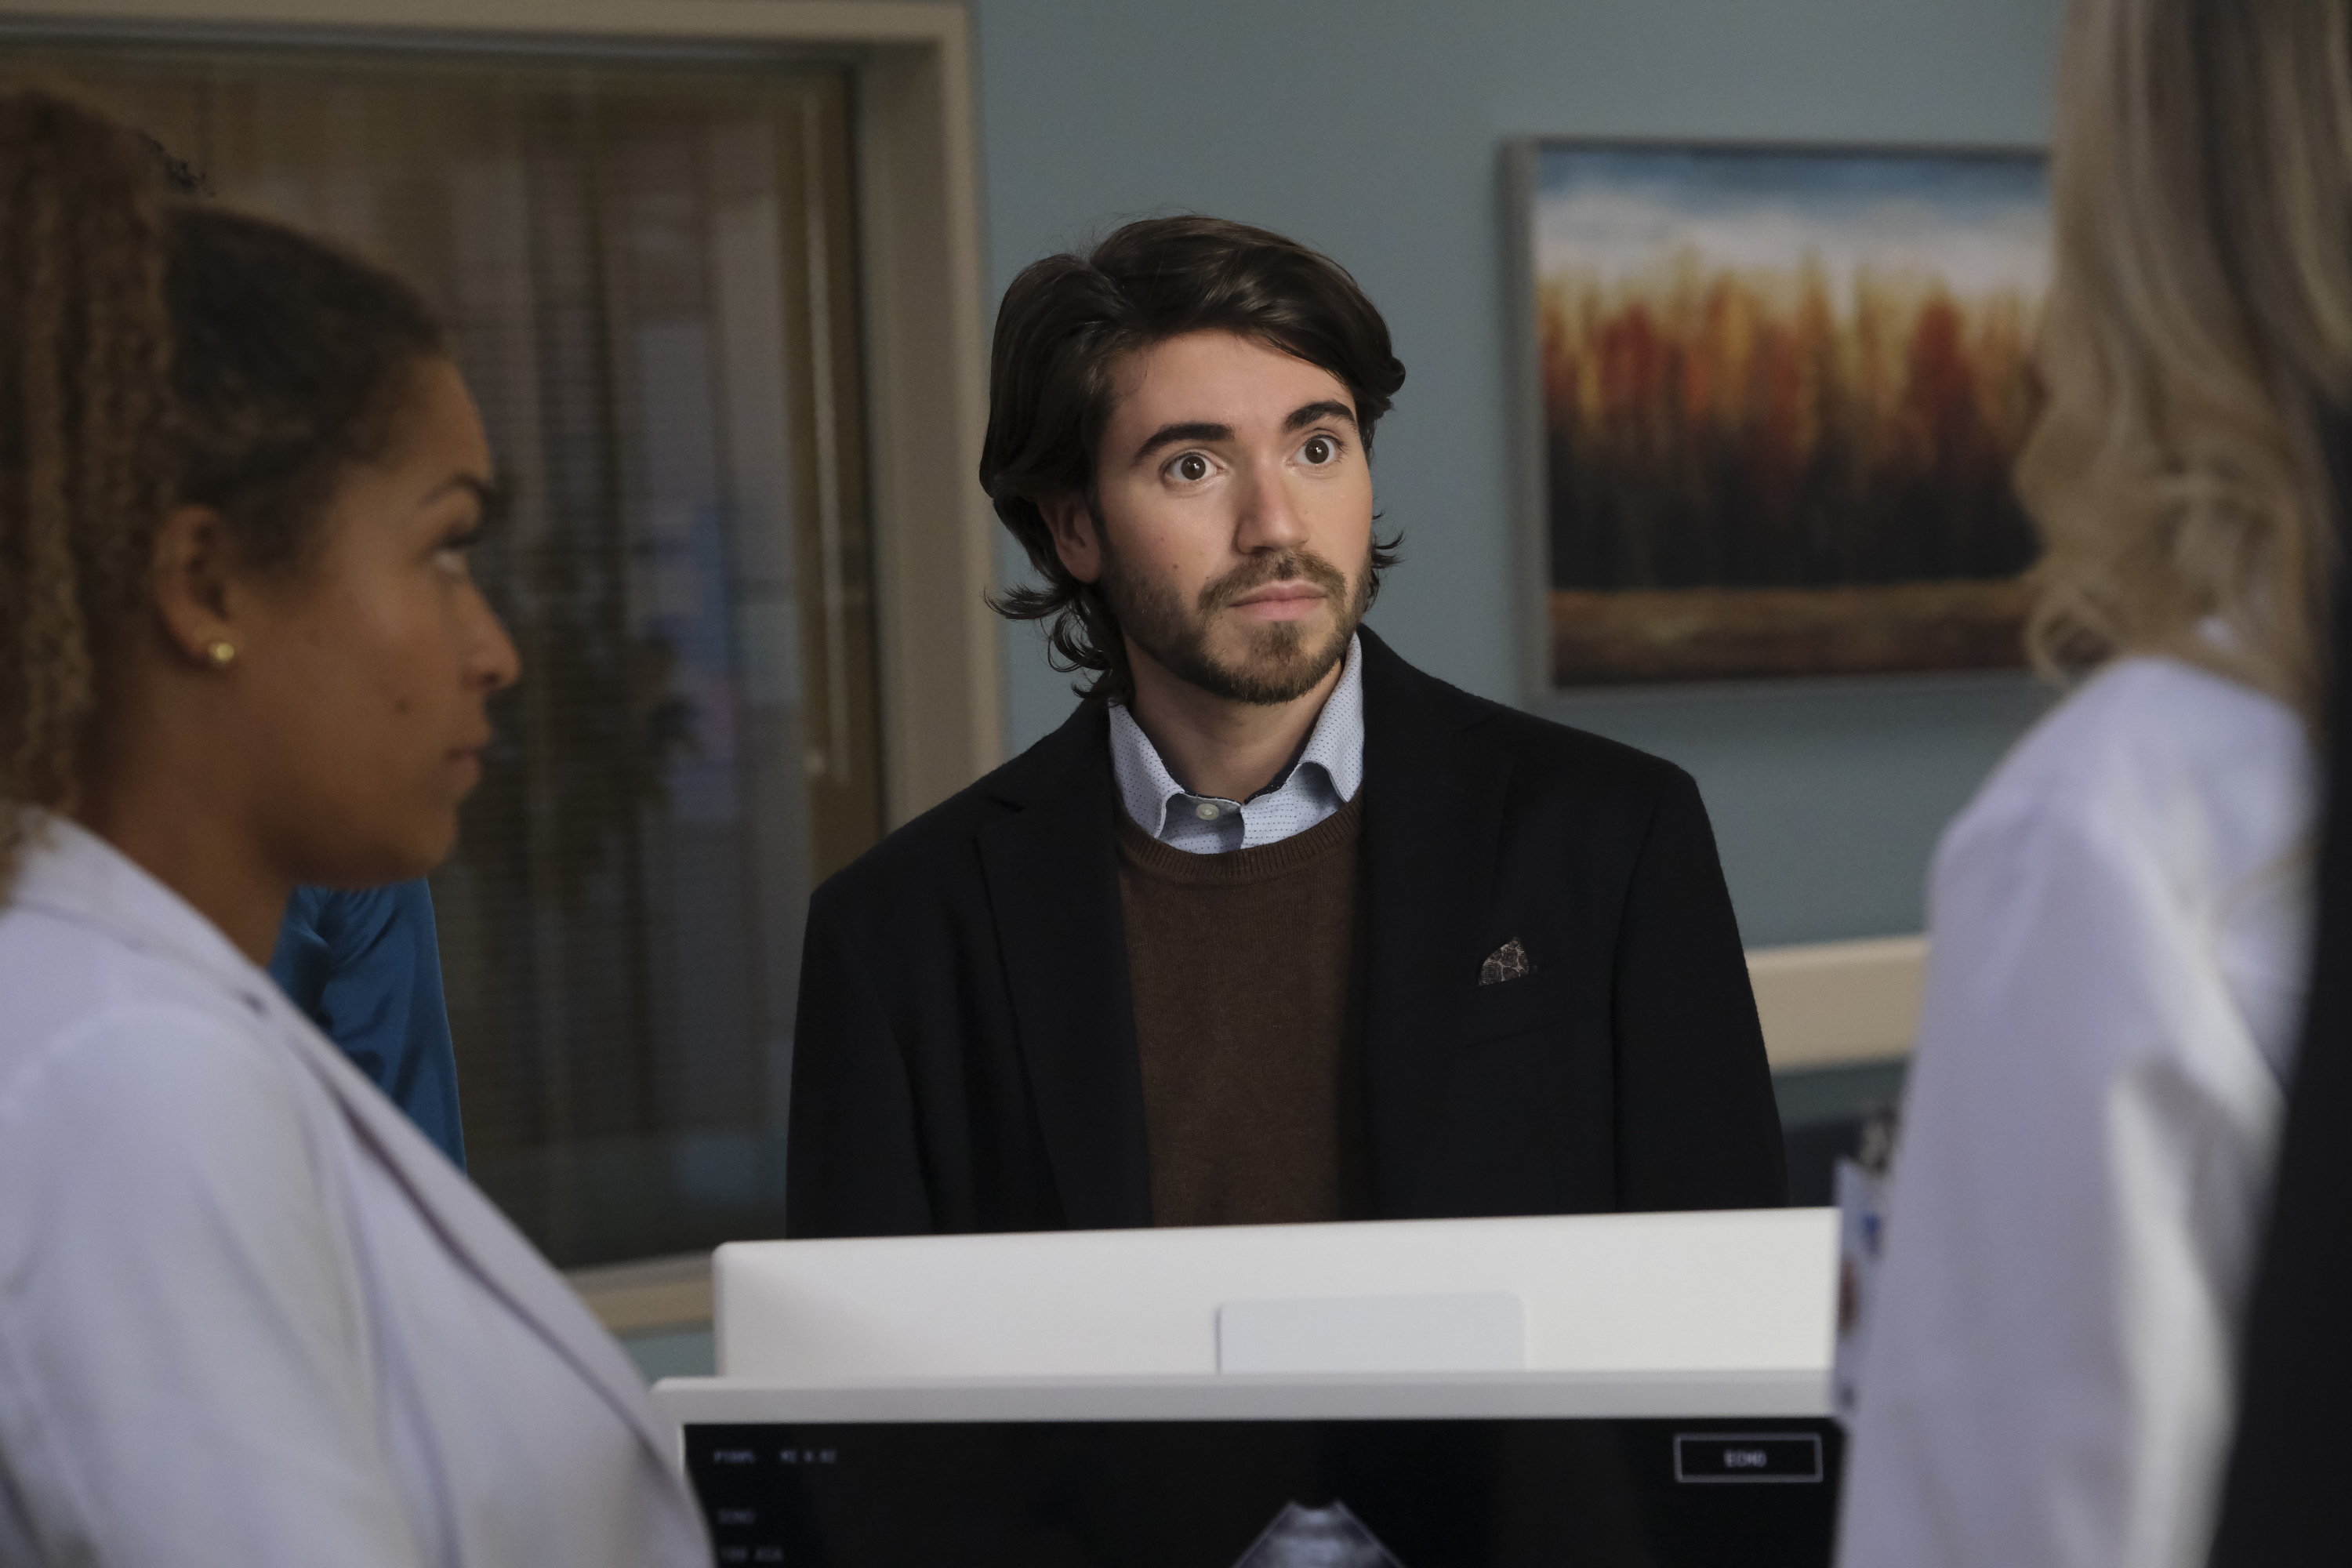 Noah Galvin as Dr. Asher Wolke on The Good Doctor | Jeff Weddell via Getty Images